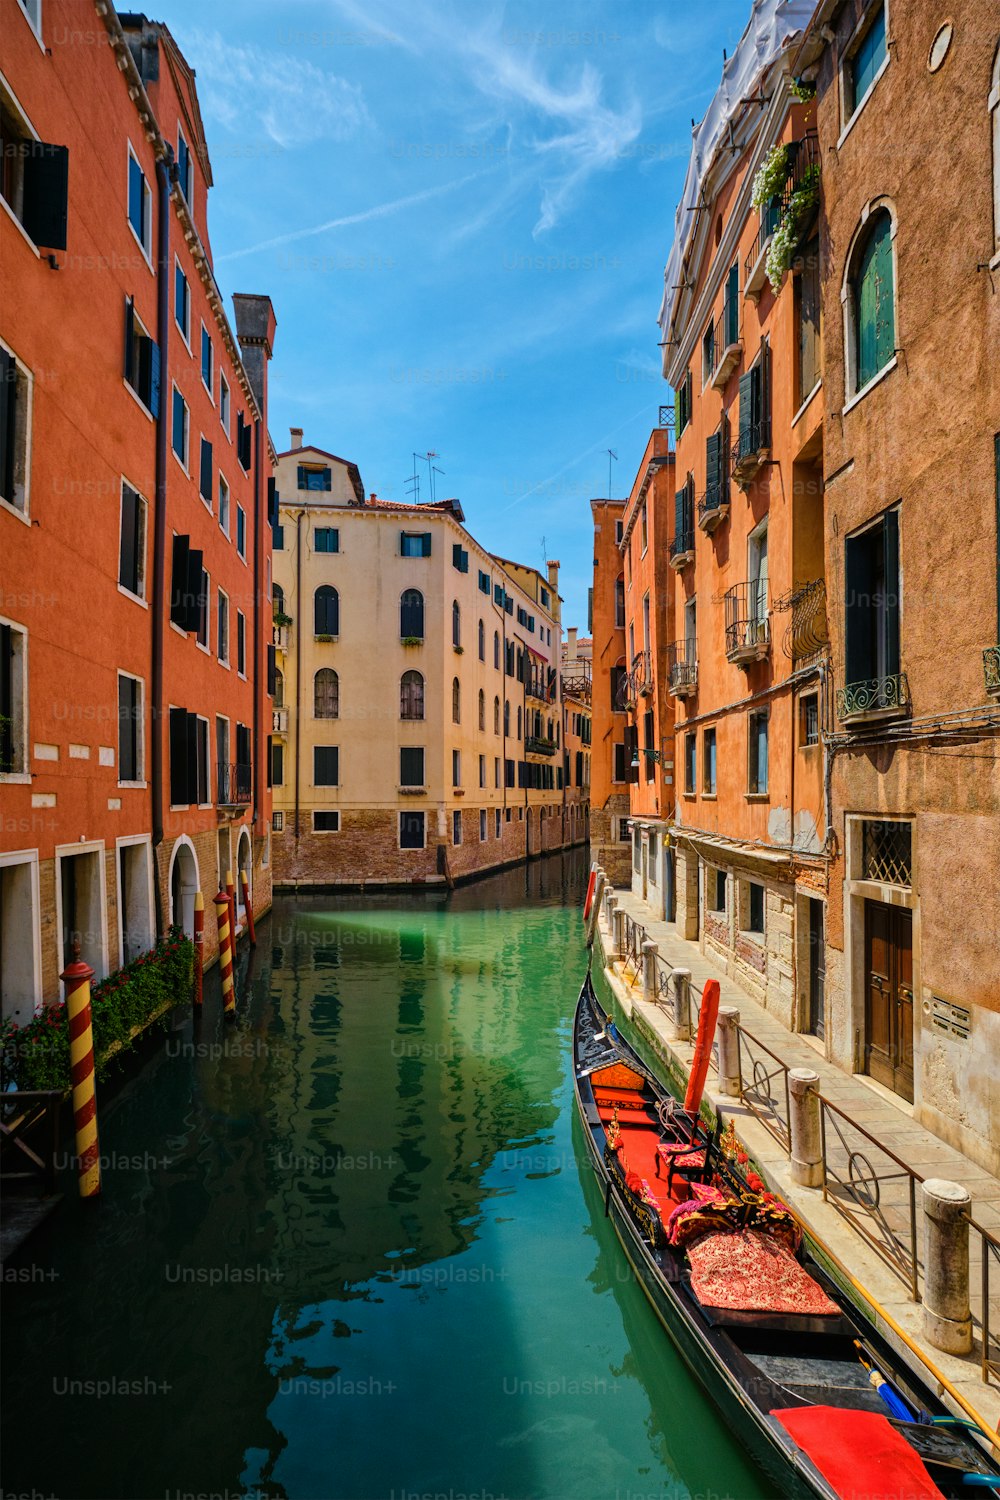 Narrow canal between colorful old houses with gondola boat in Venice, Italy